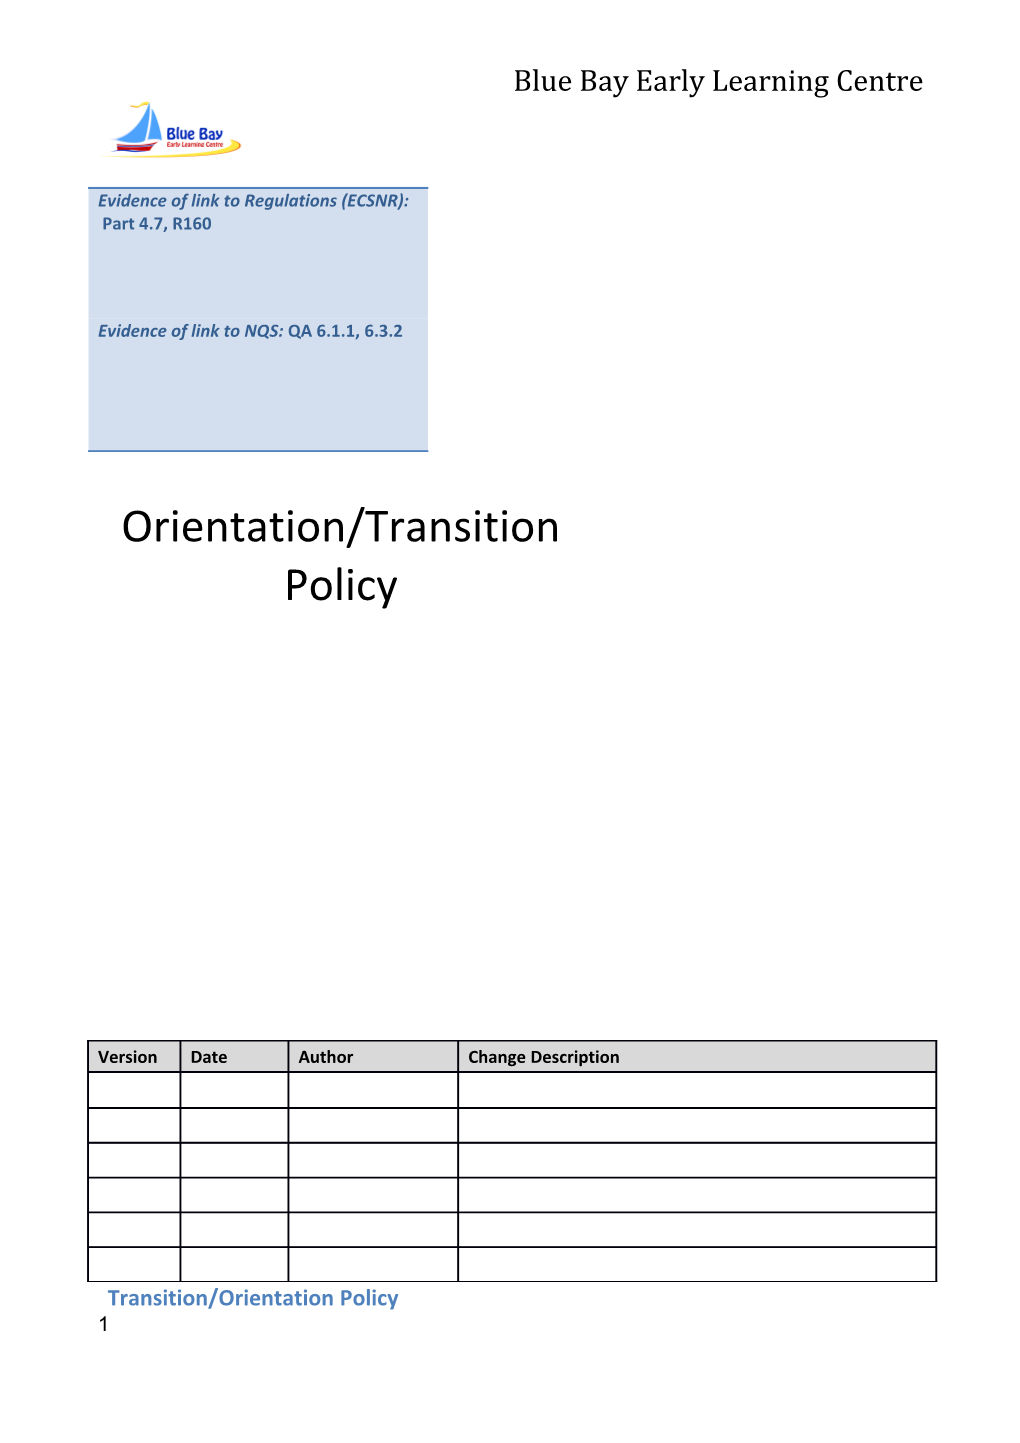 Orientation/Transition Policy